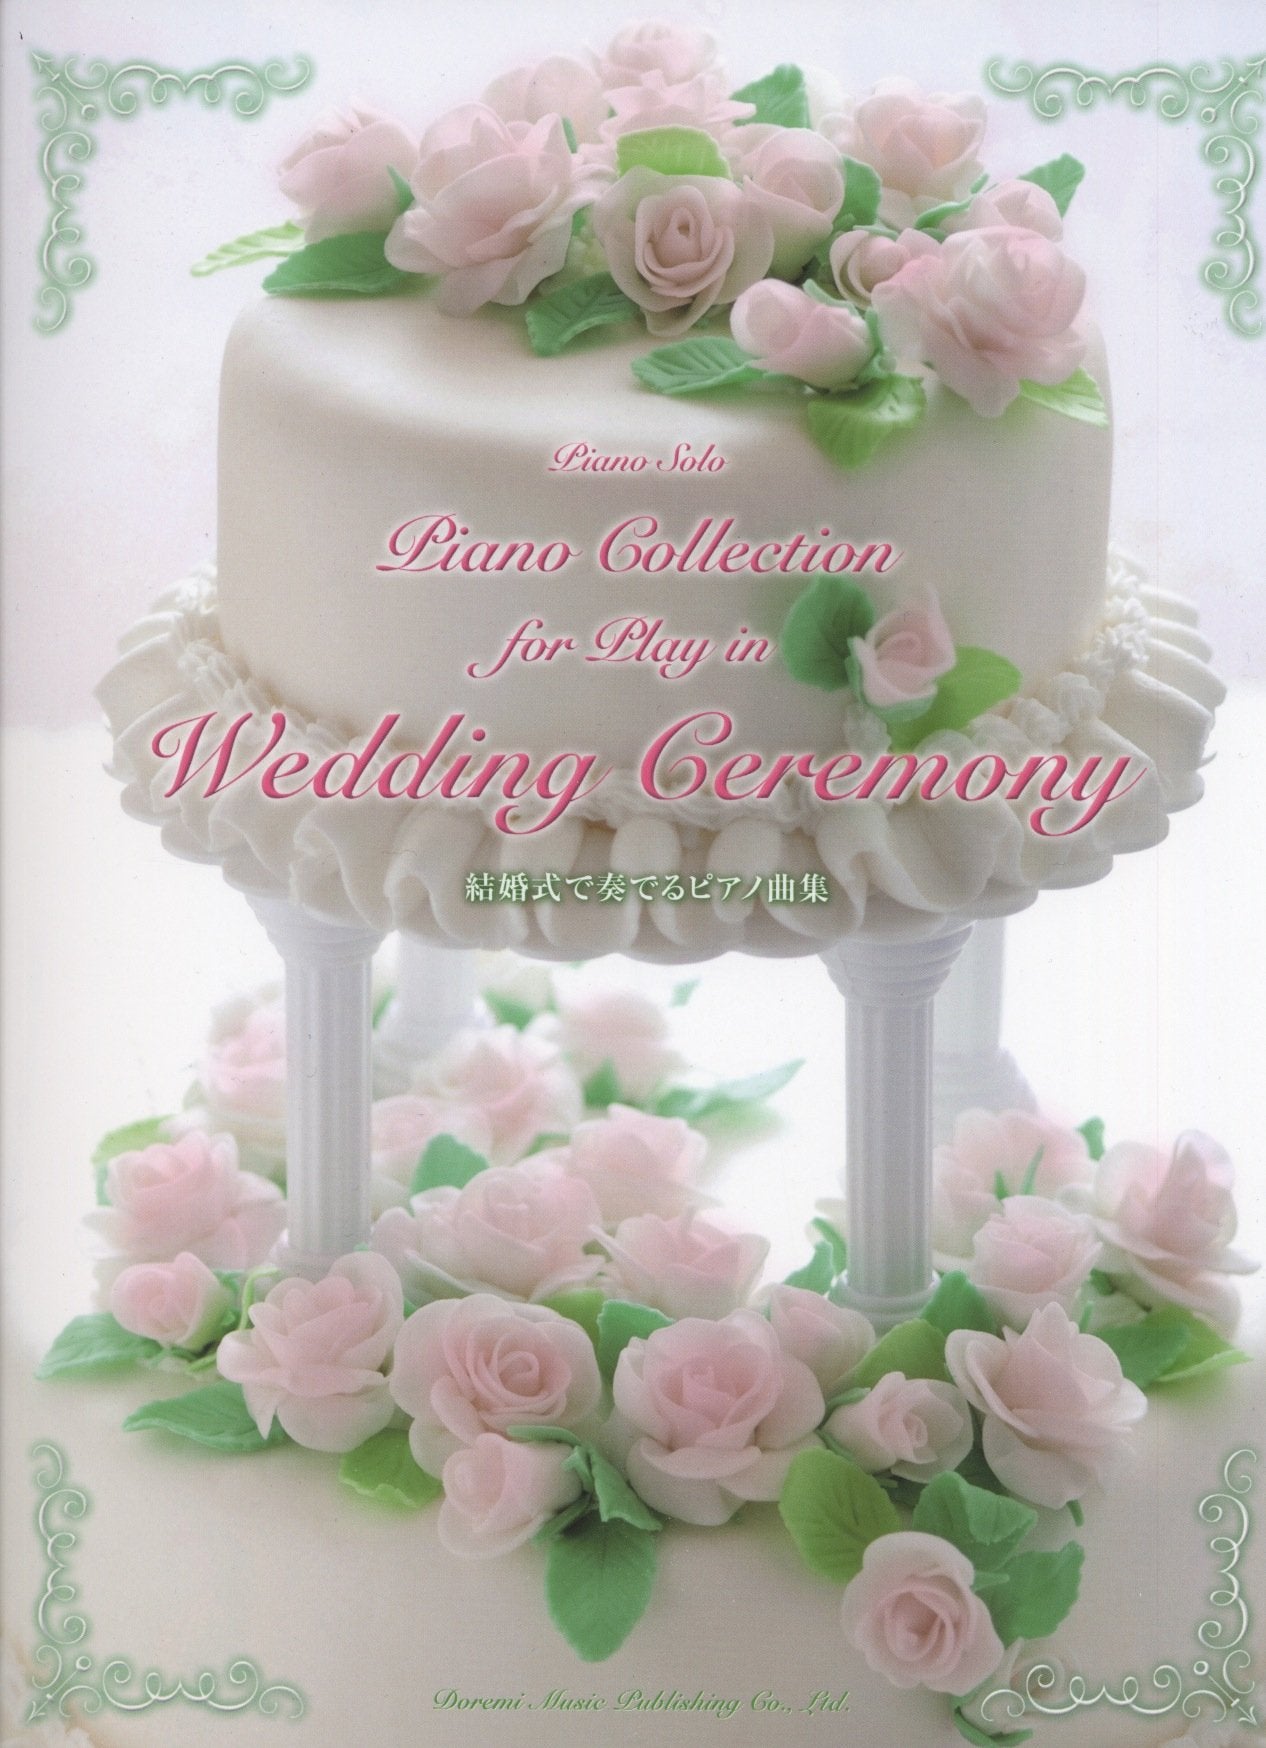 Piano Solo - Piano Collection for Play in Wedding Ceremony